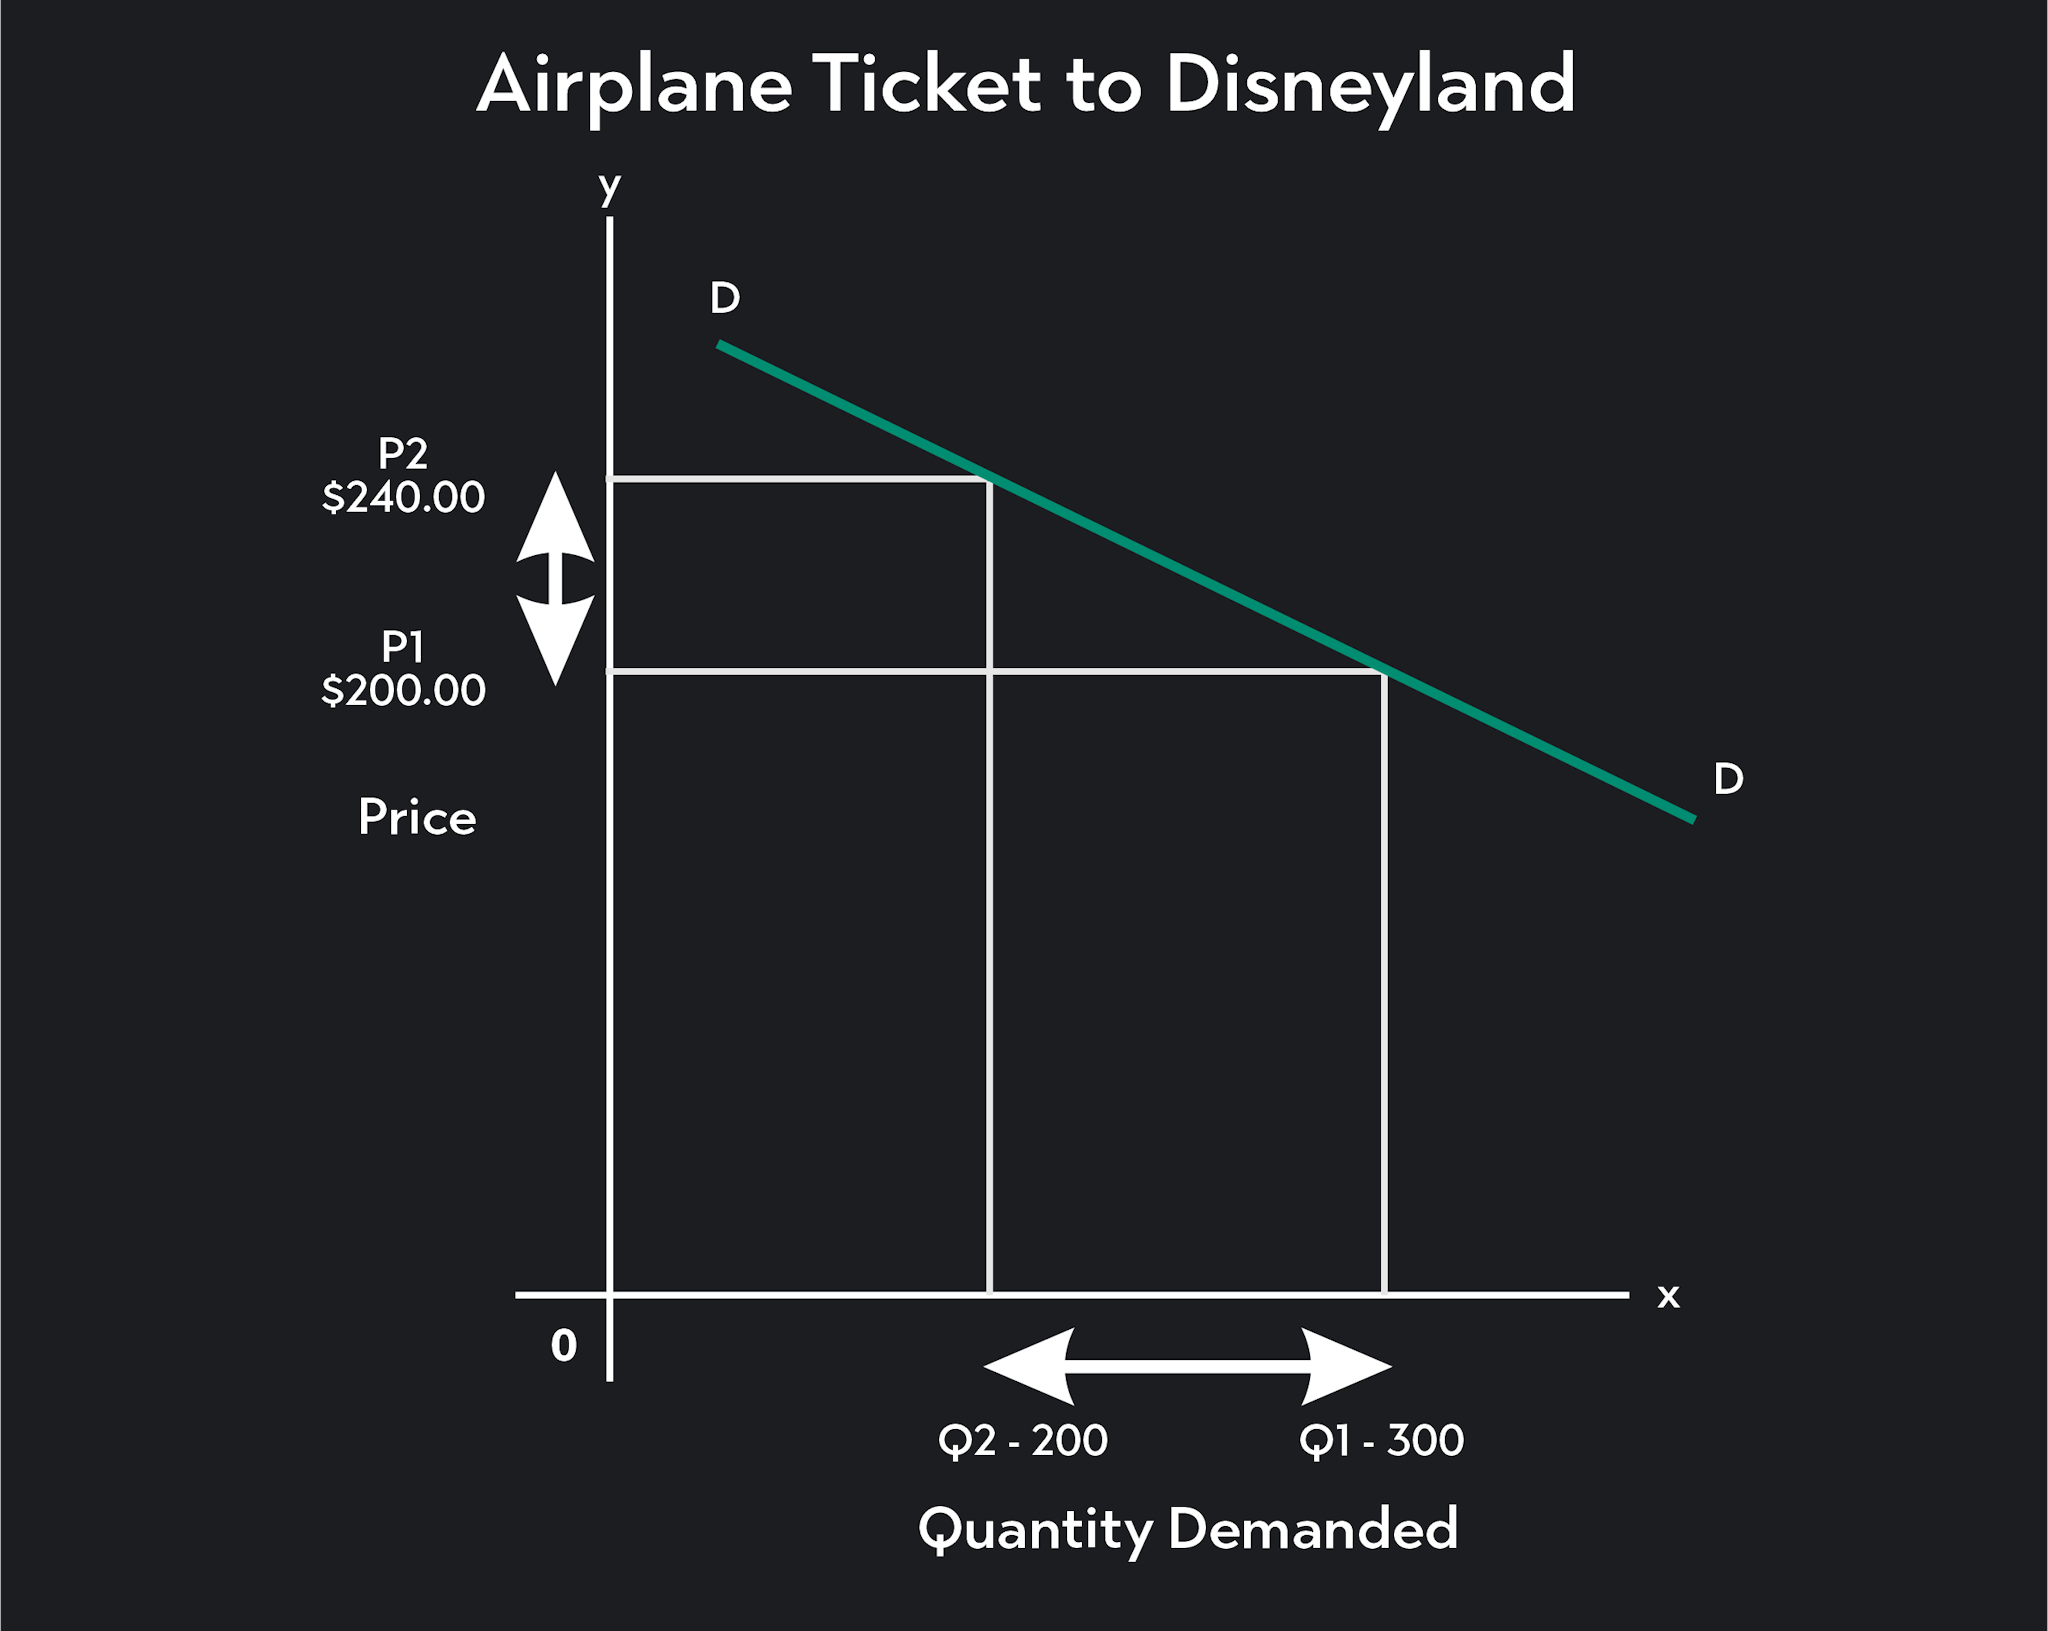 The graph below shows the demand curve for an airline ticket to Disneyland in Orlando, FL, from New York City. 